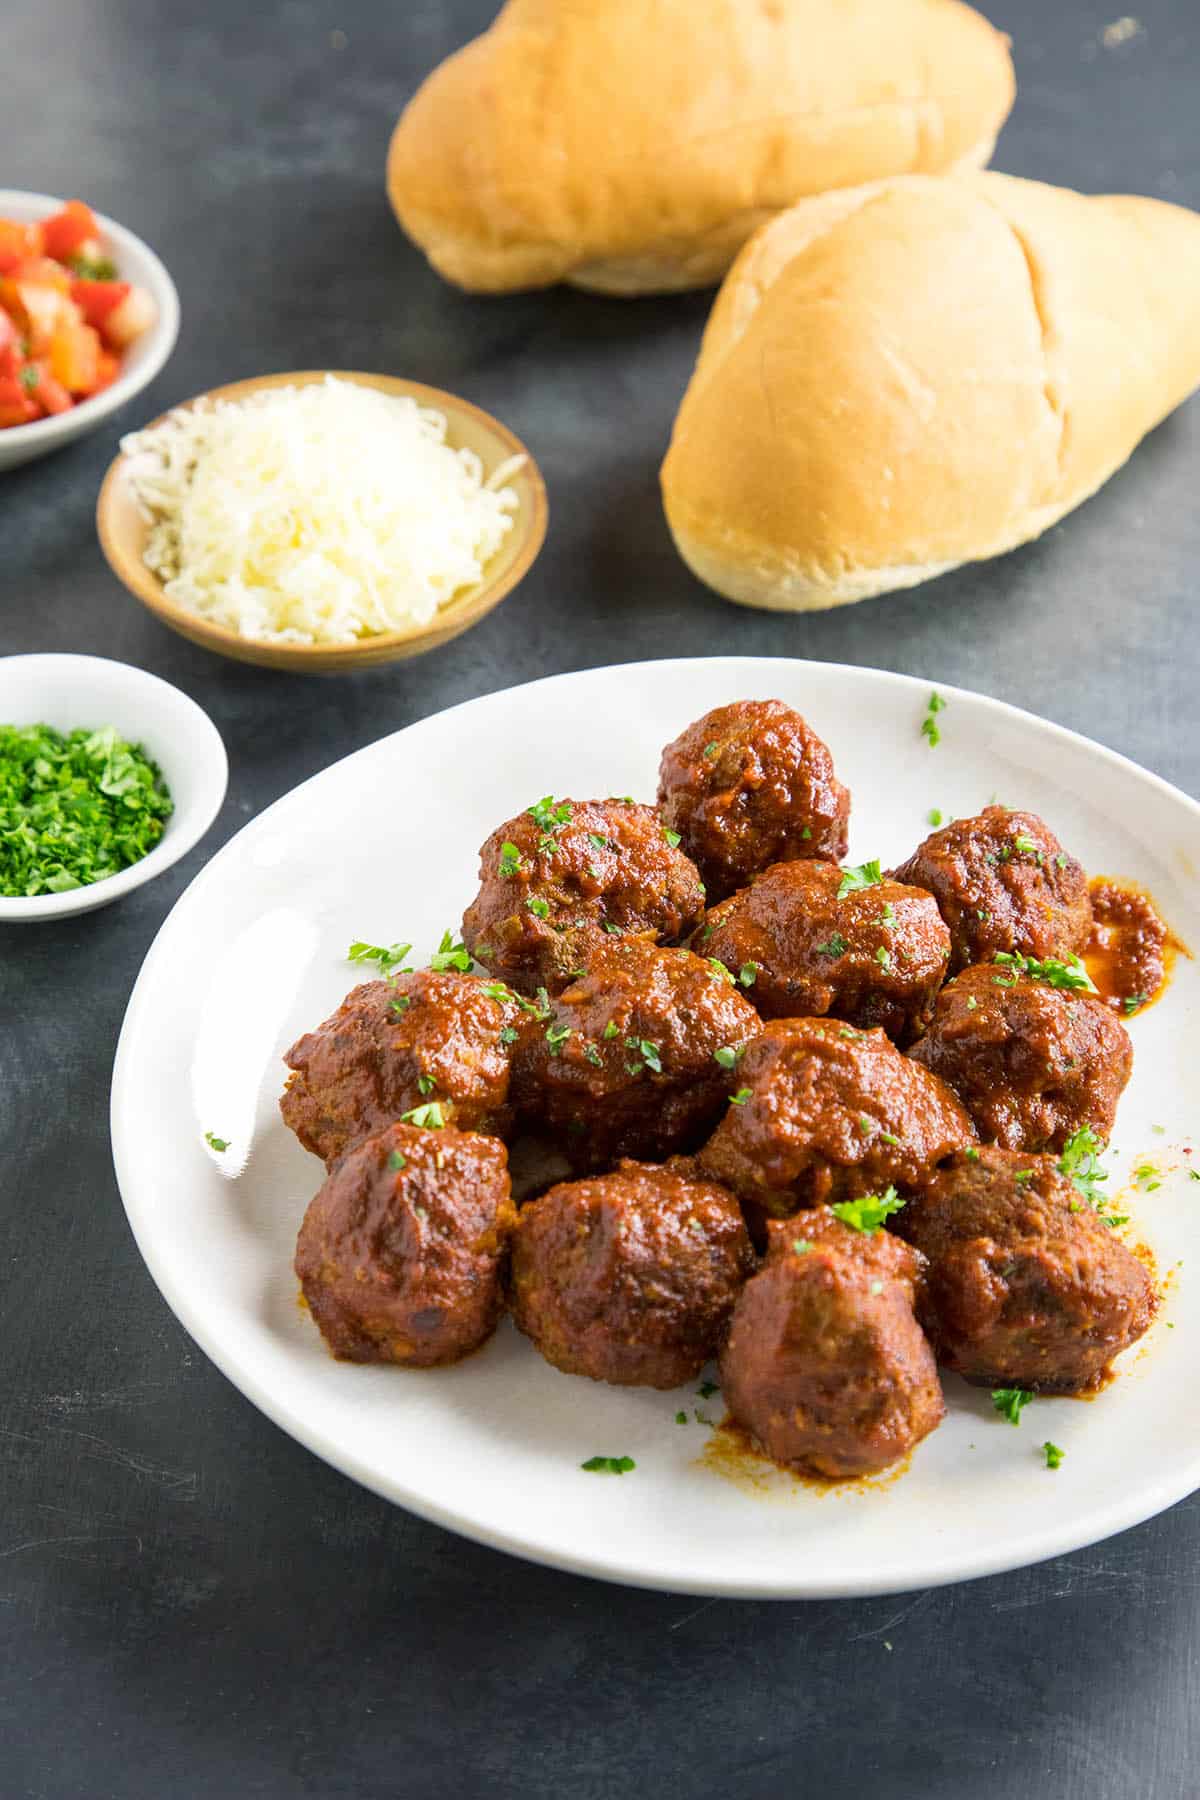 Serving Spicy Meatballs in Chipotle-Lime Sauce on buns for a meatball sub sandwich.